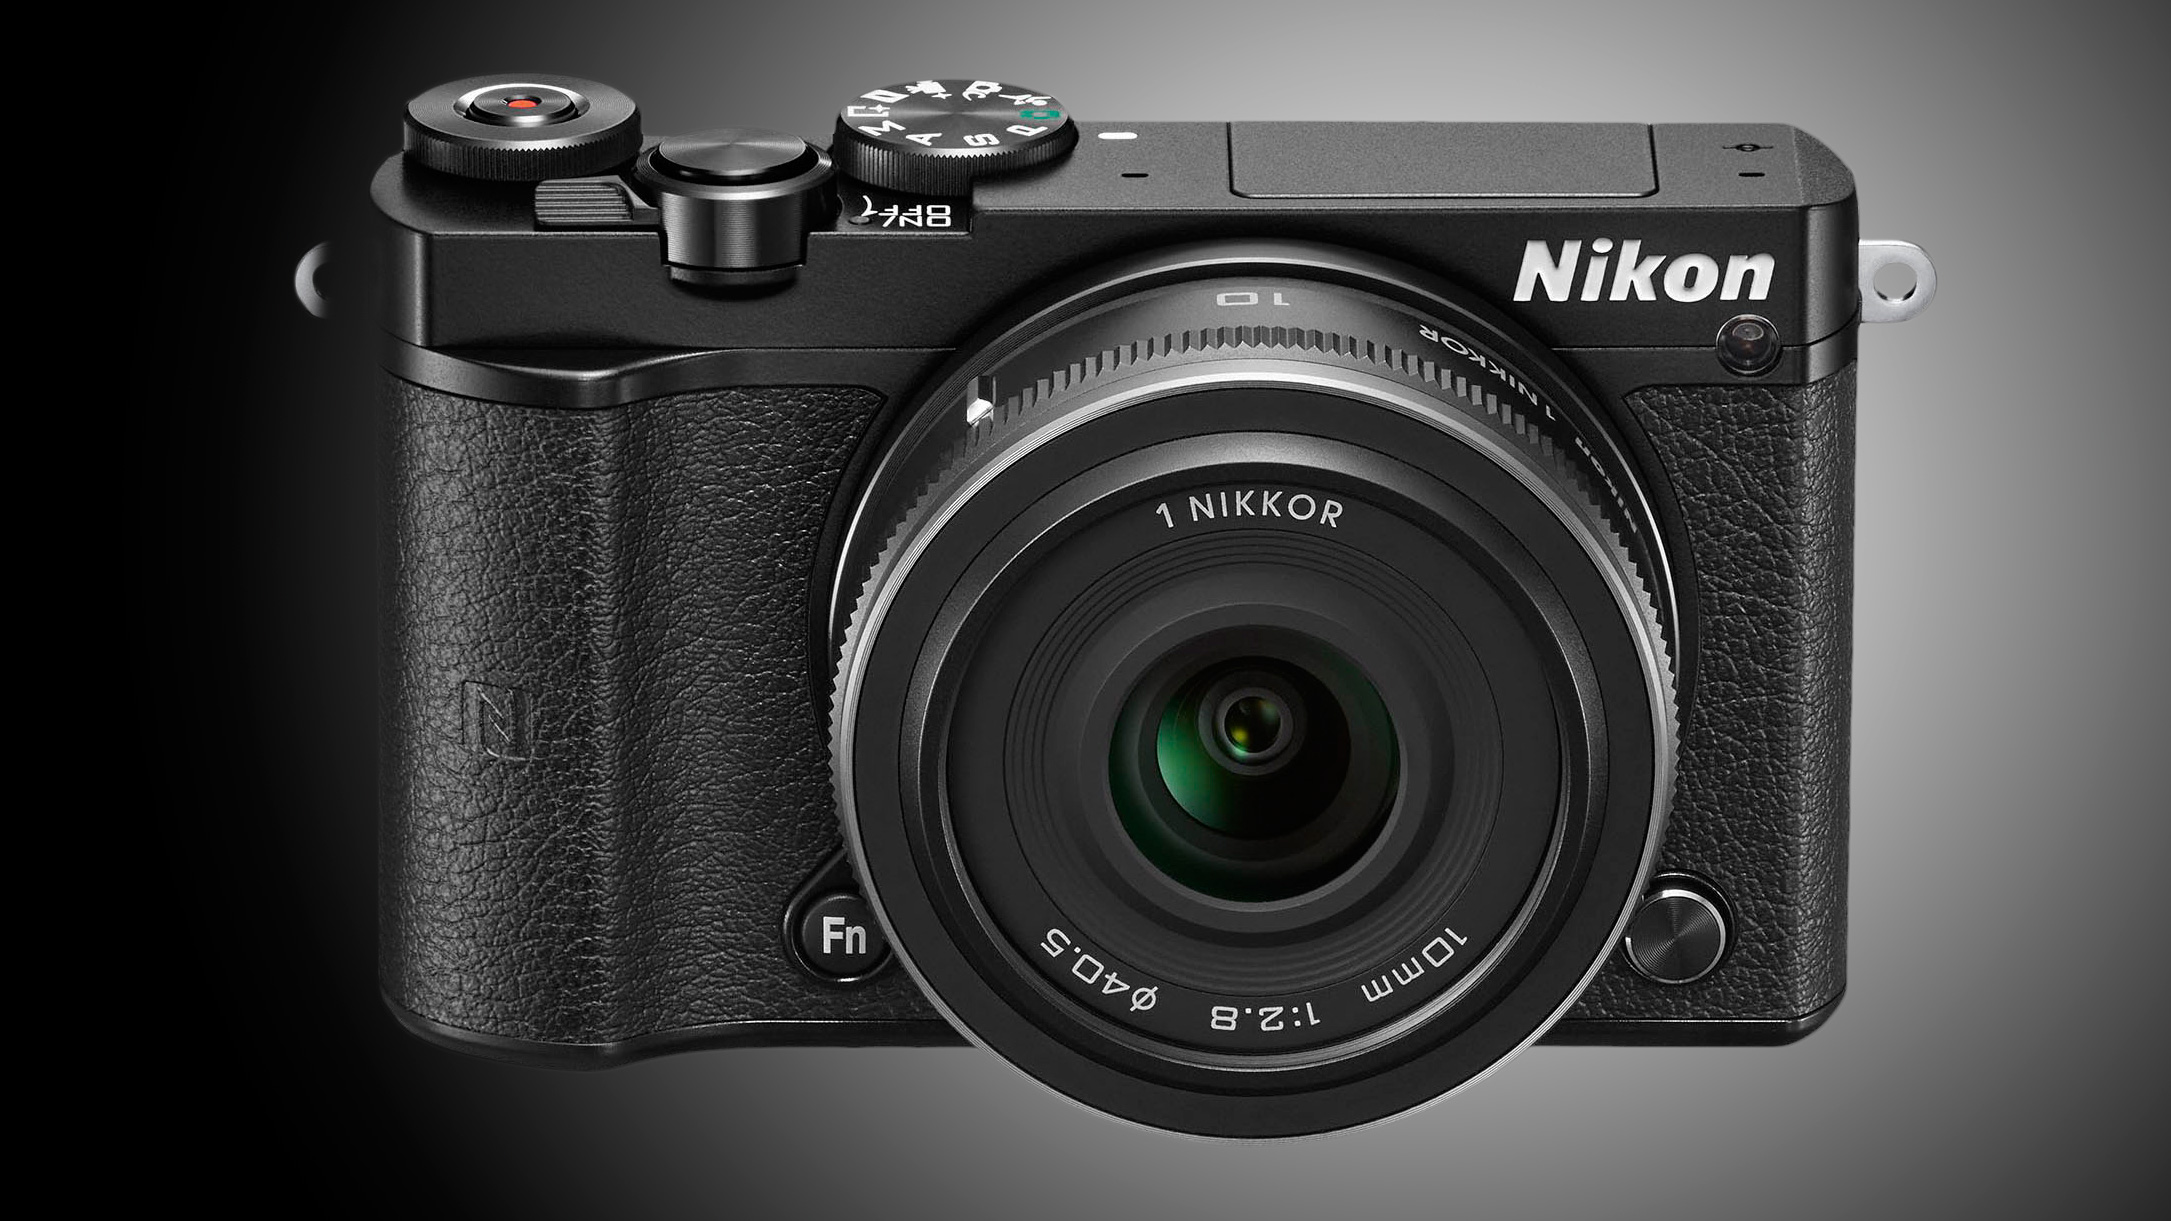 The new Nikon 1 J5 blends high-tech features with old-school looks